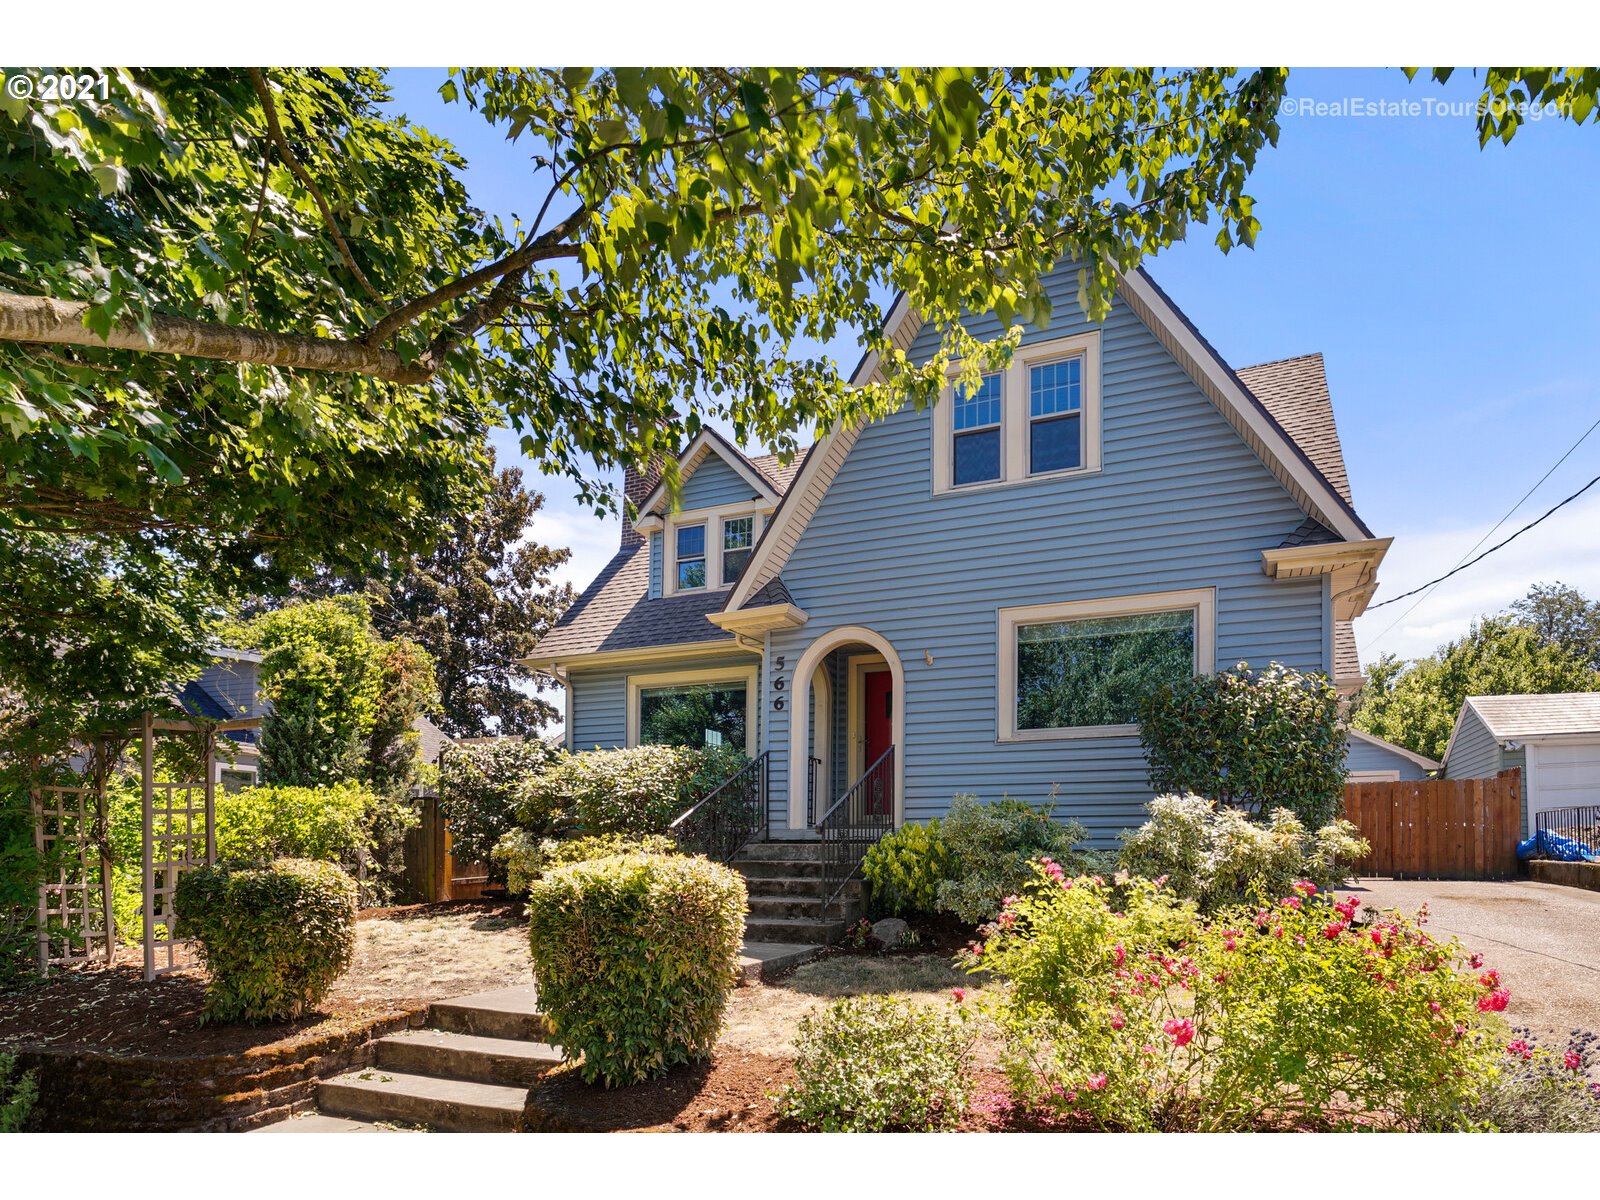 566 N LOMBARD ST (1 of 31)